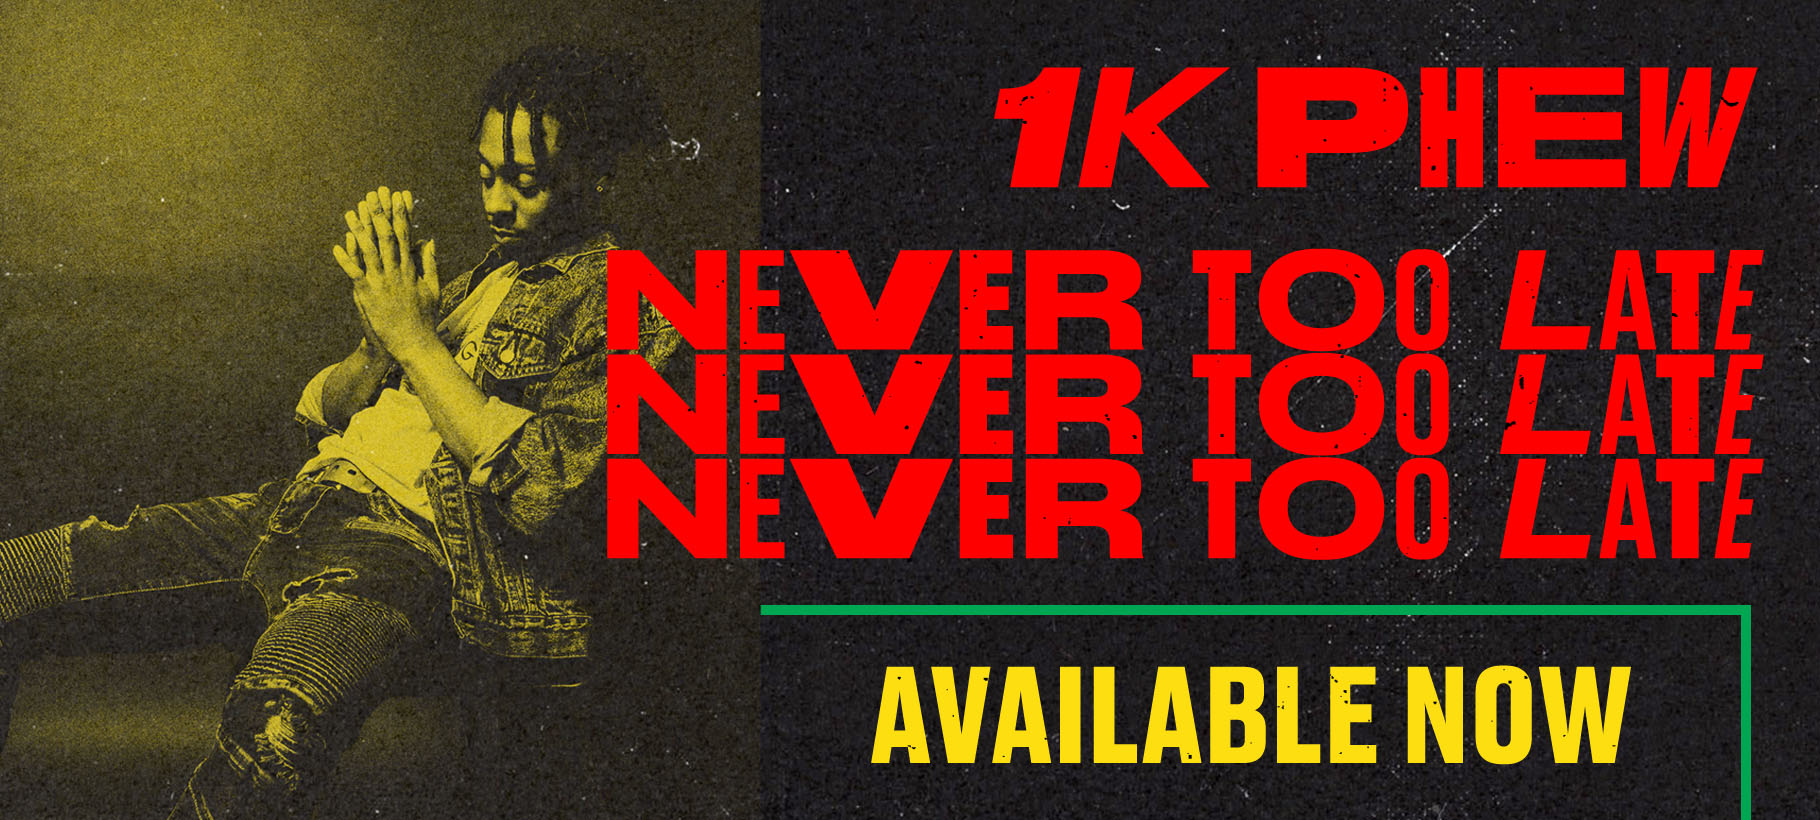 1K Phew x Never Too Late x Out Now